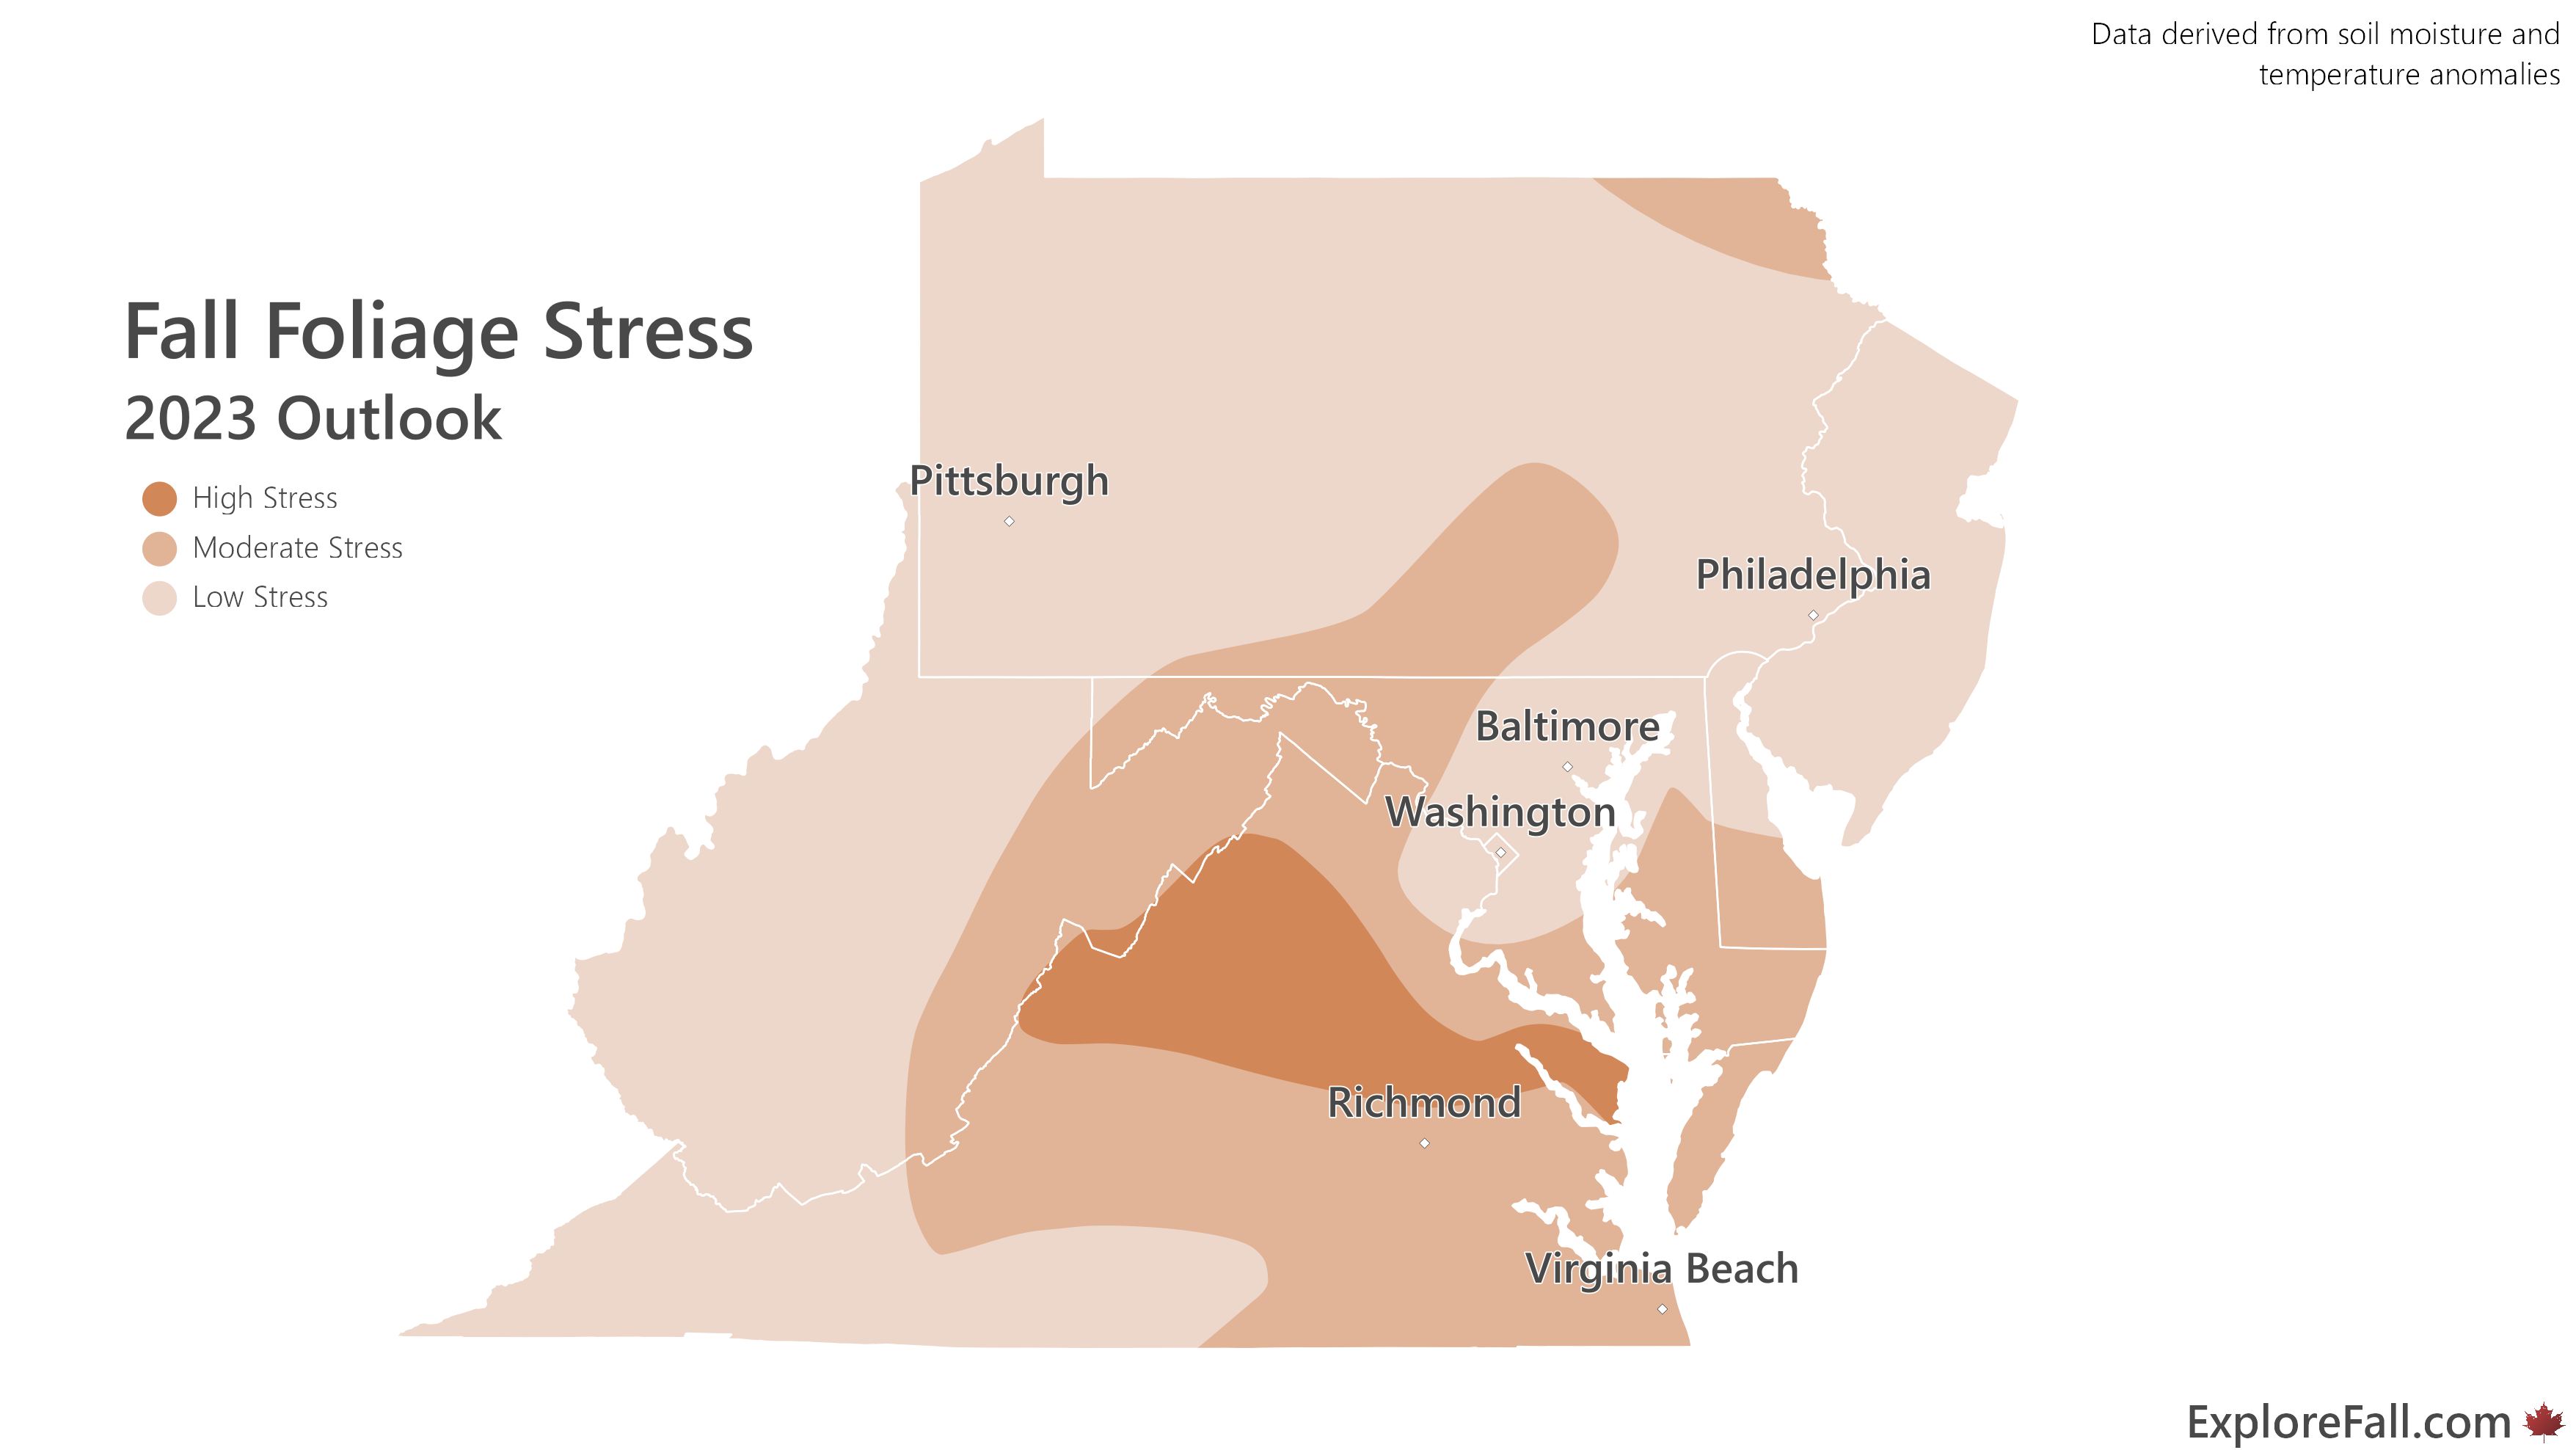 Fall foliage stress in the Northeast is low to moderate in 2023.